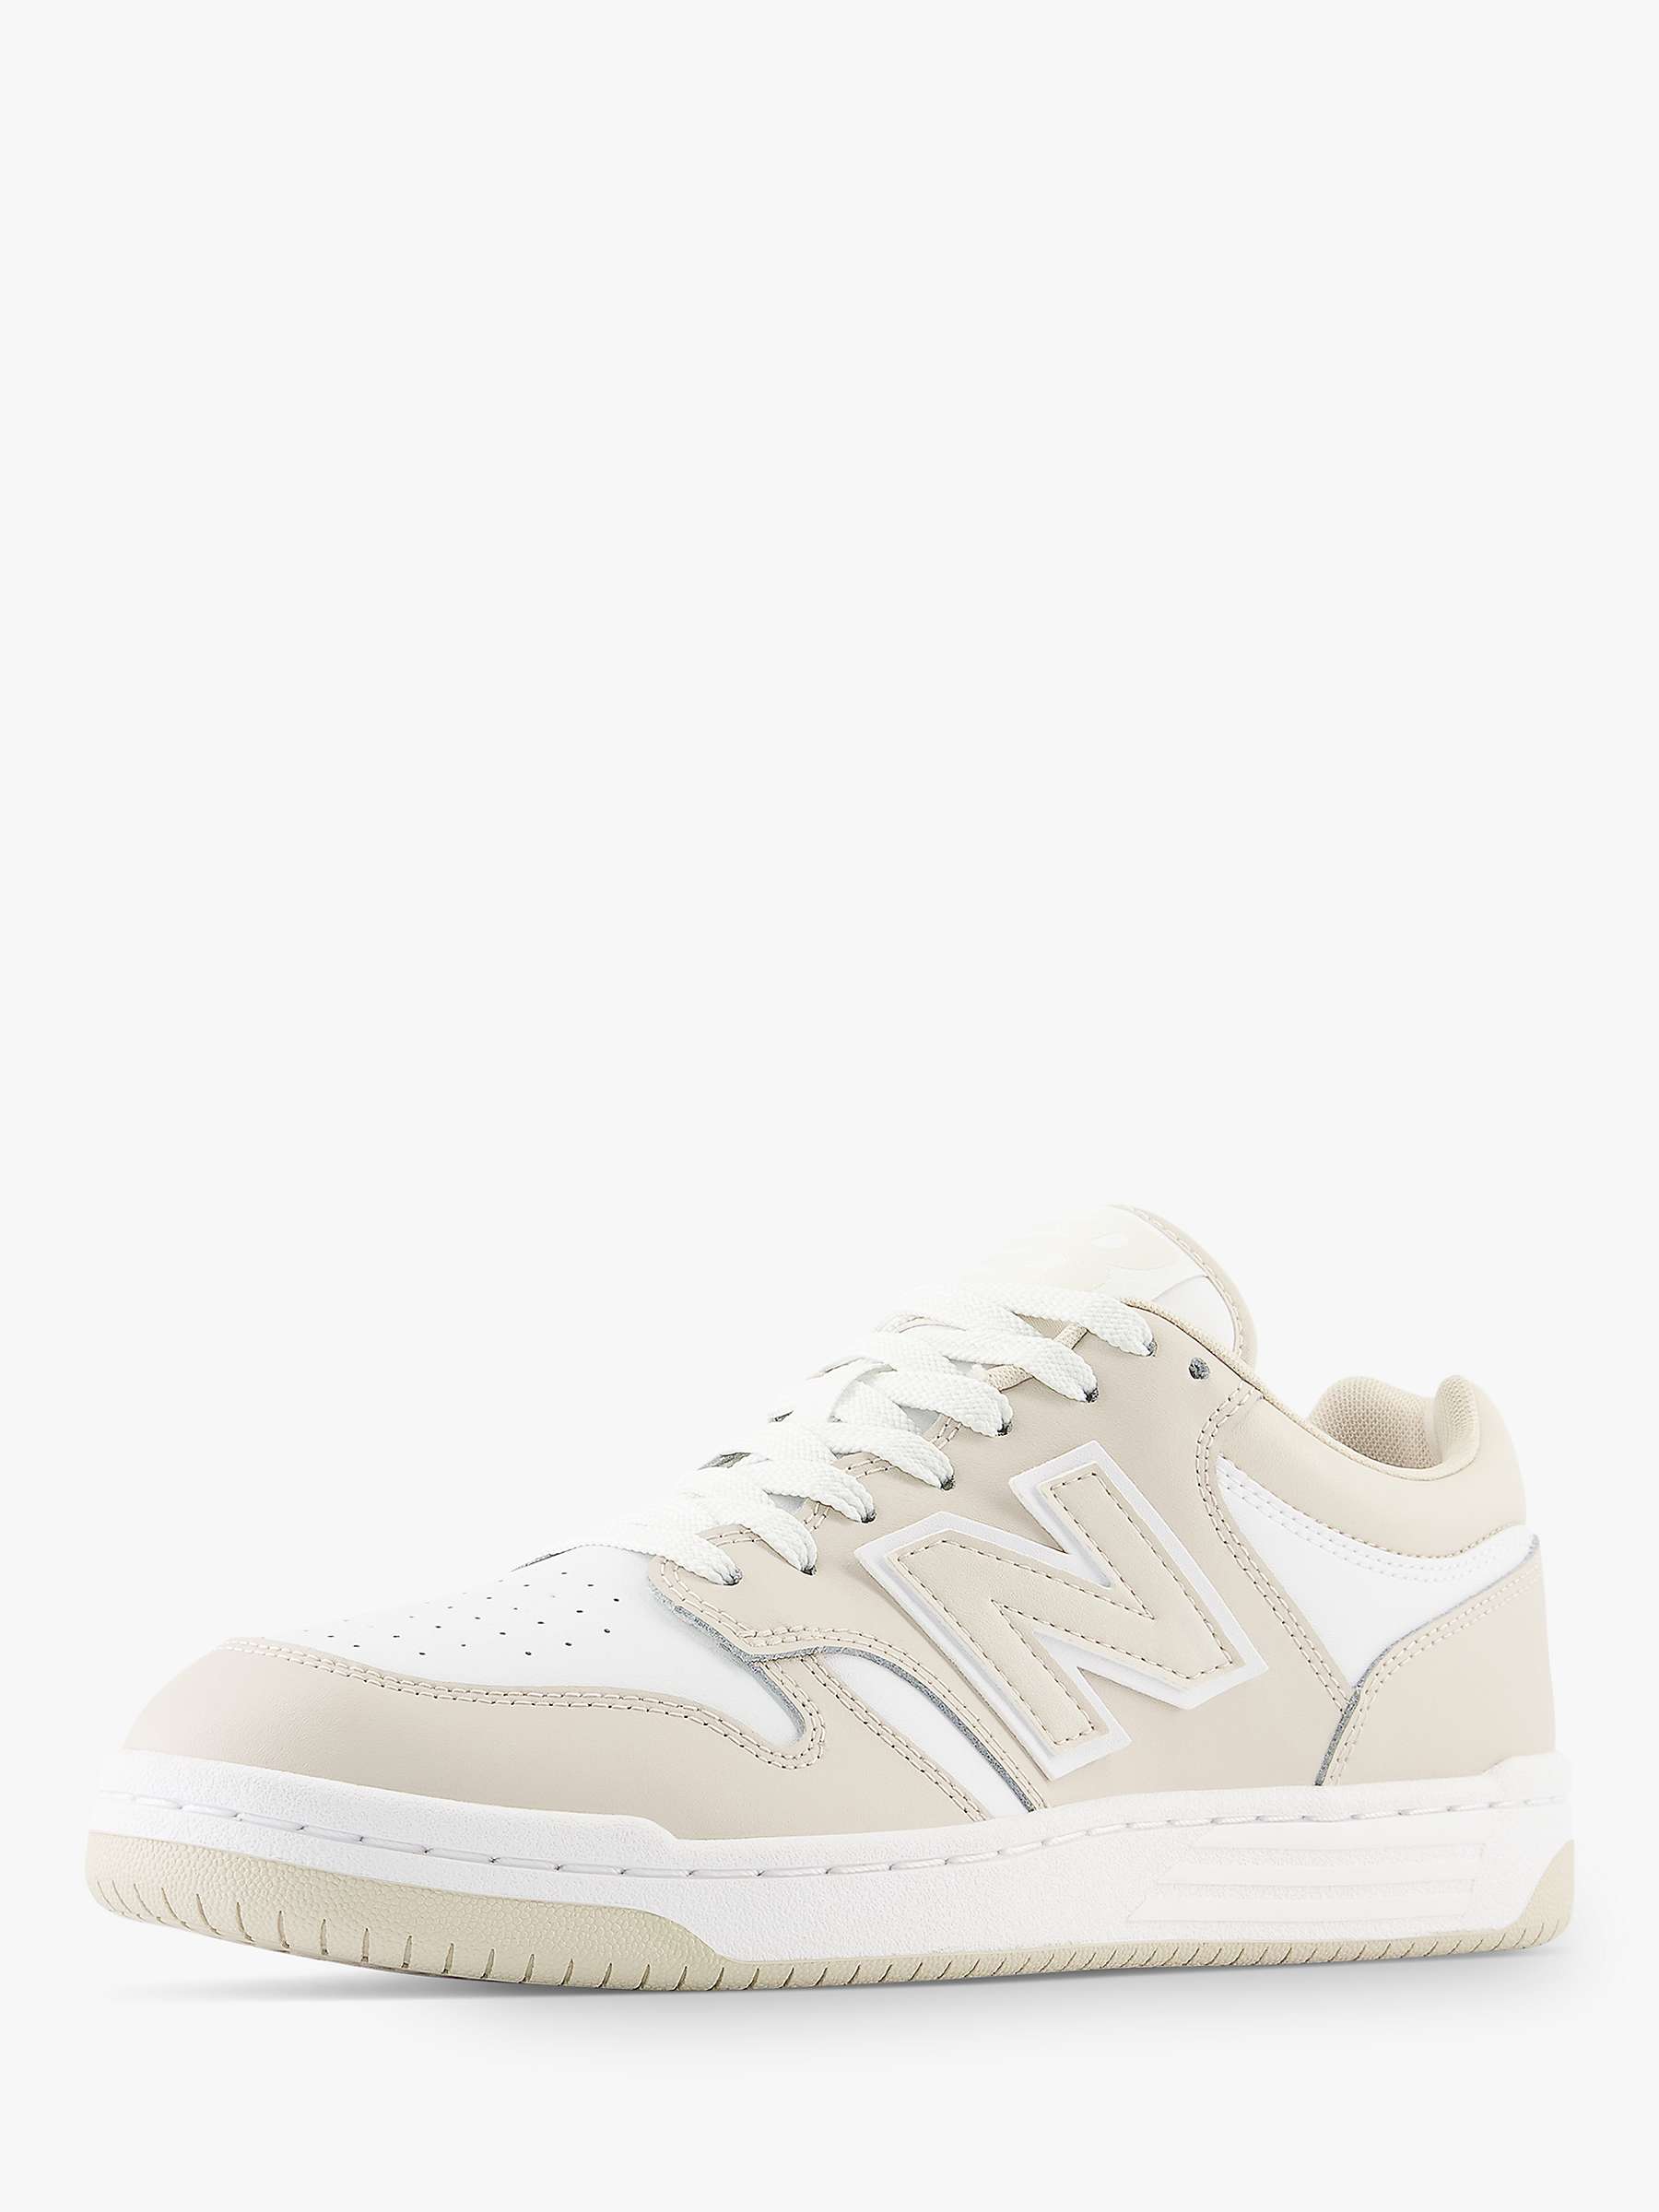 Buy New Balance 480 Leather Trainers Online at johnlewis.com